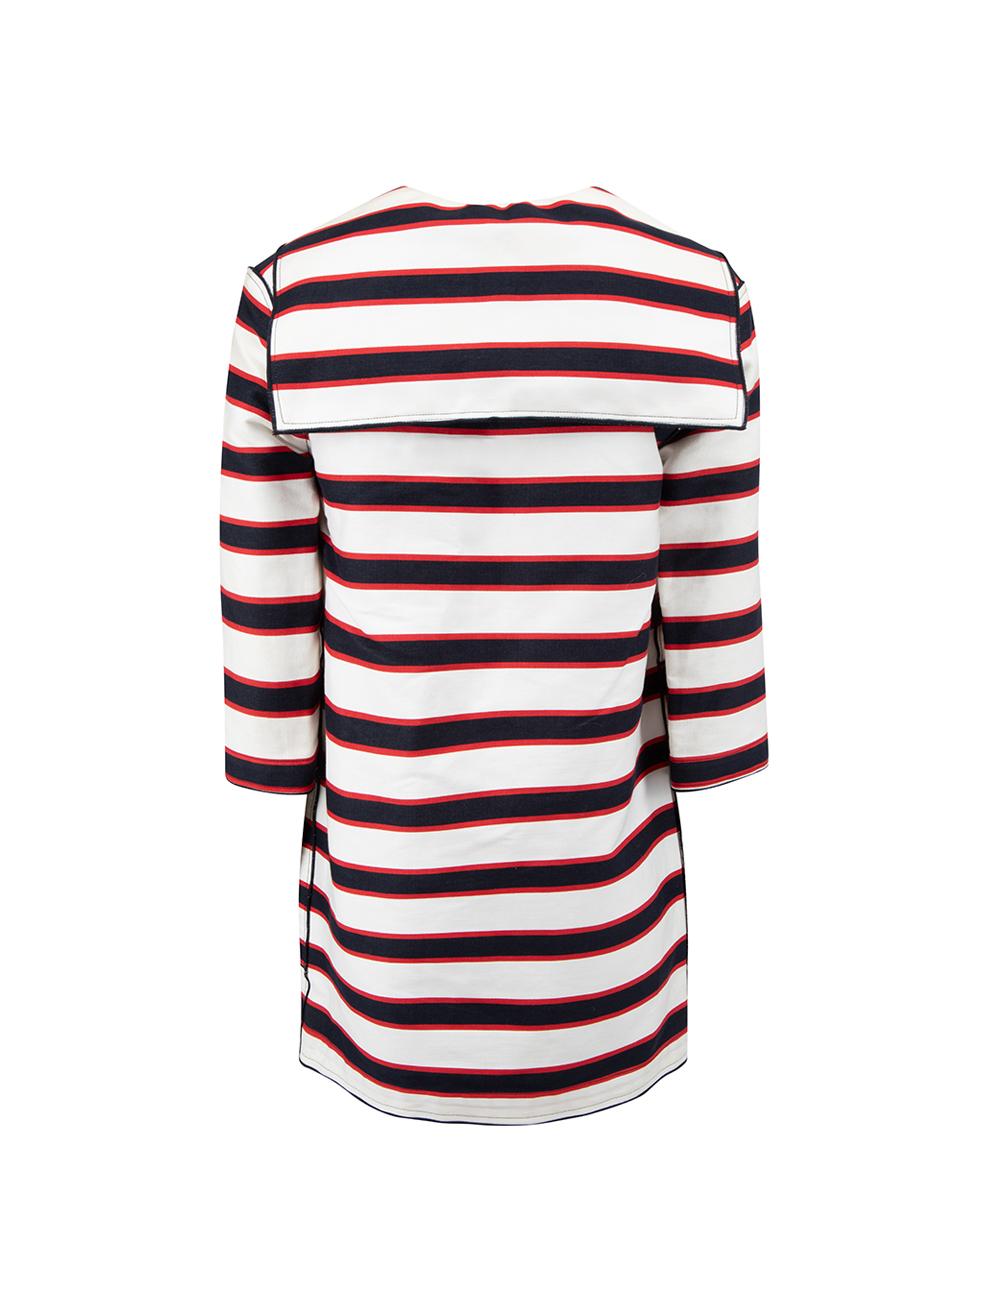 Dolce & Gabbana D&G Striped Nautical Coat Size XS In New Condition For Sale In London, GB